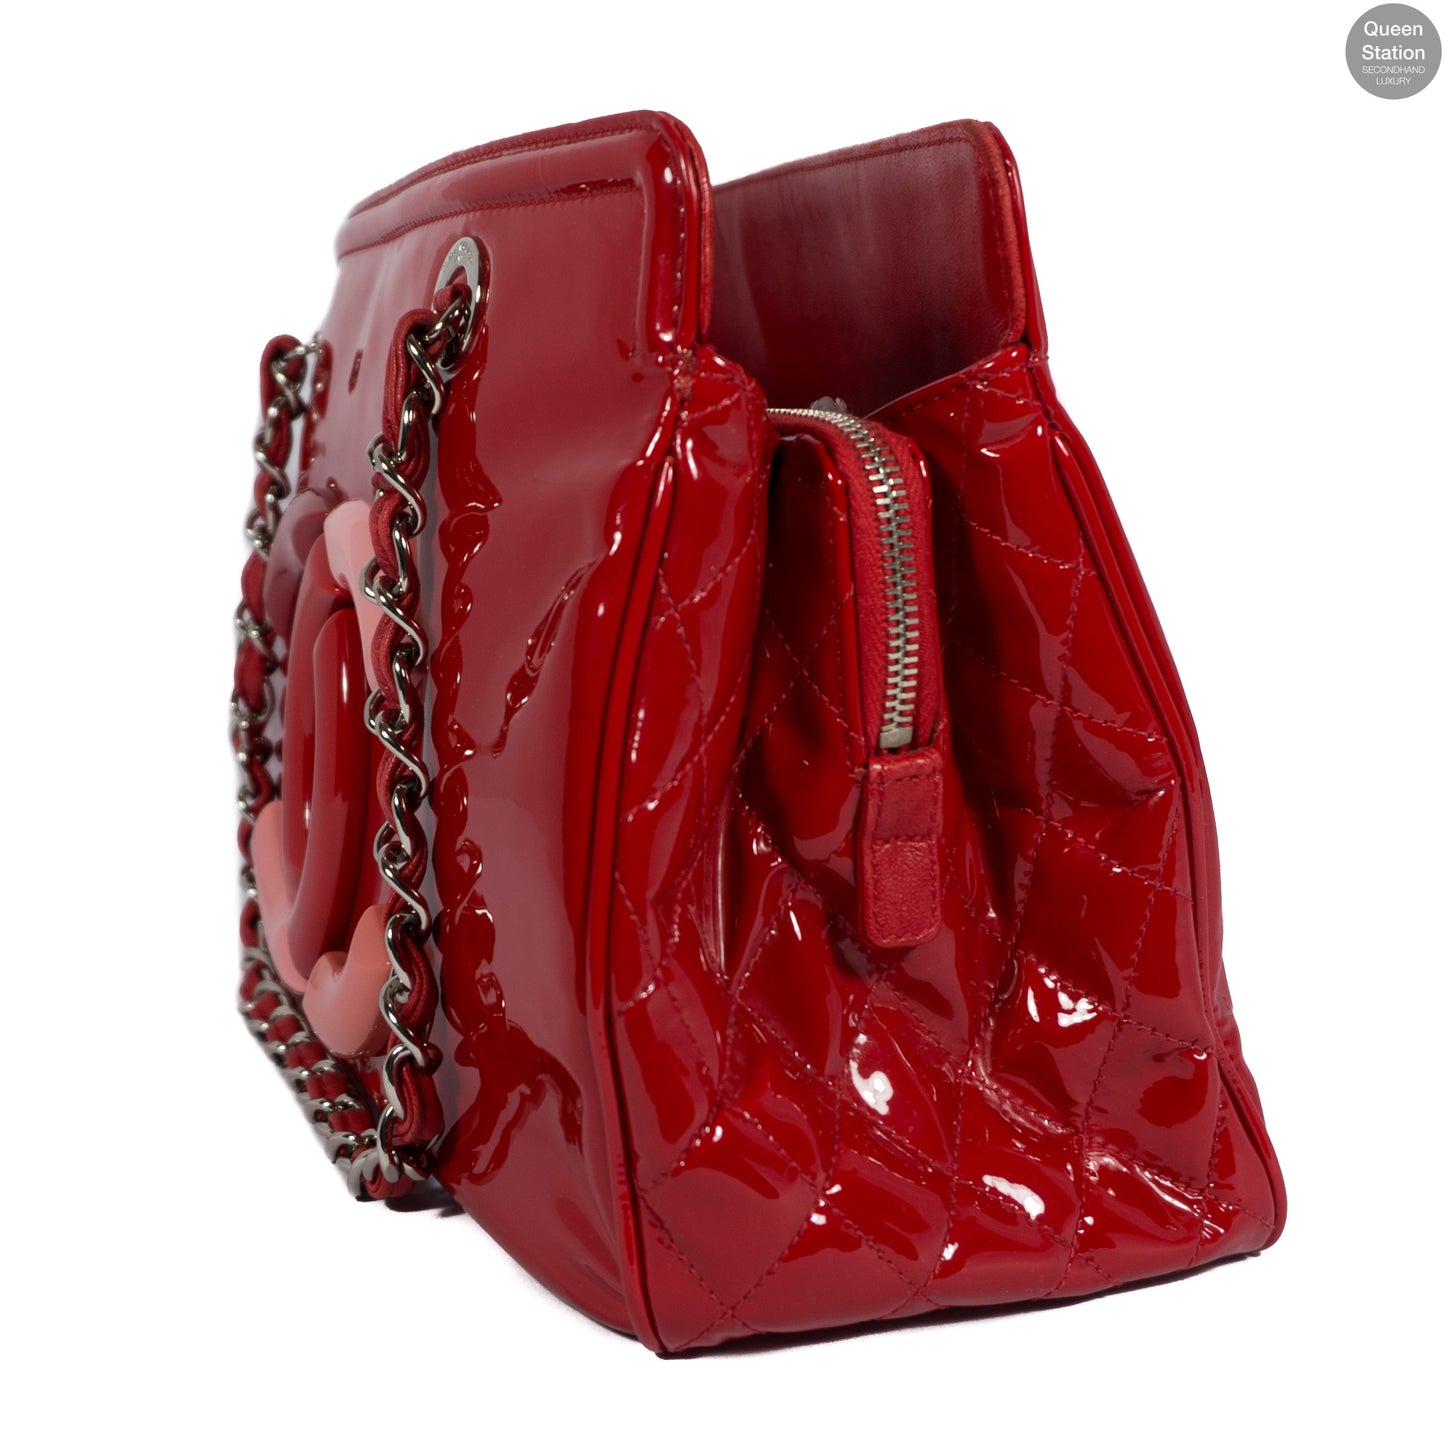 Red Lipstick Patent Leather Tote Bag